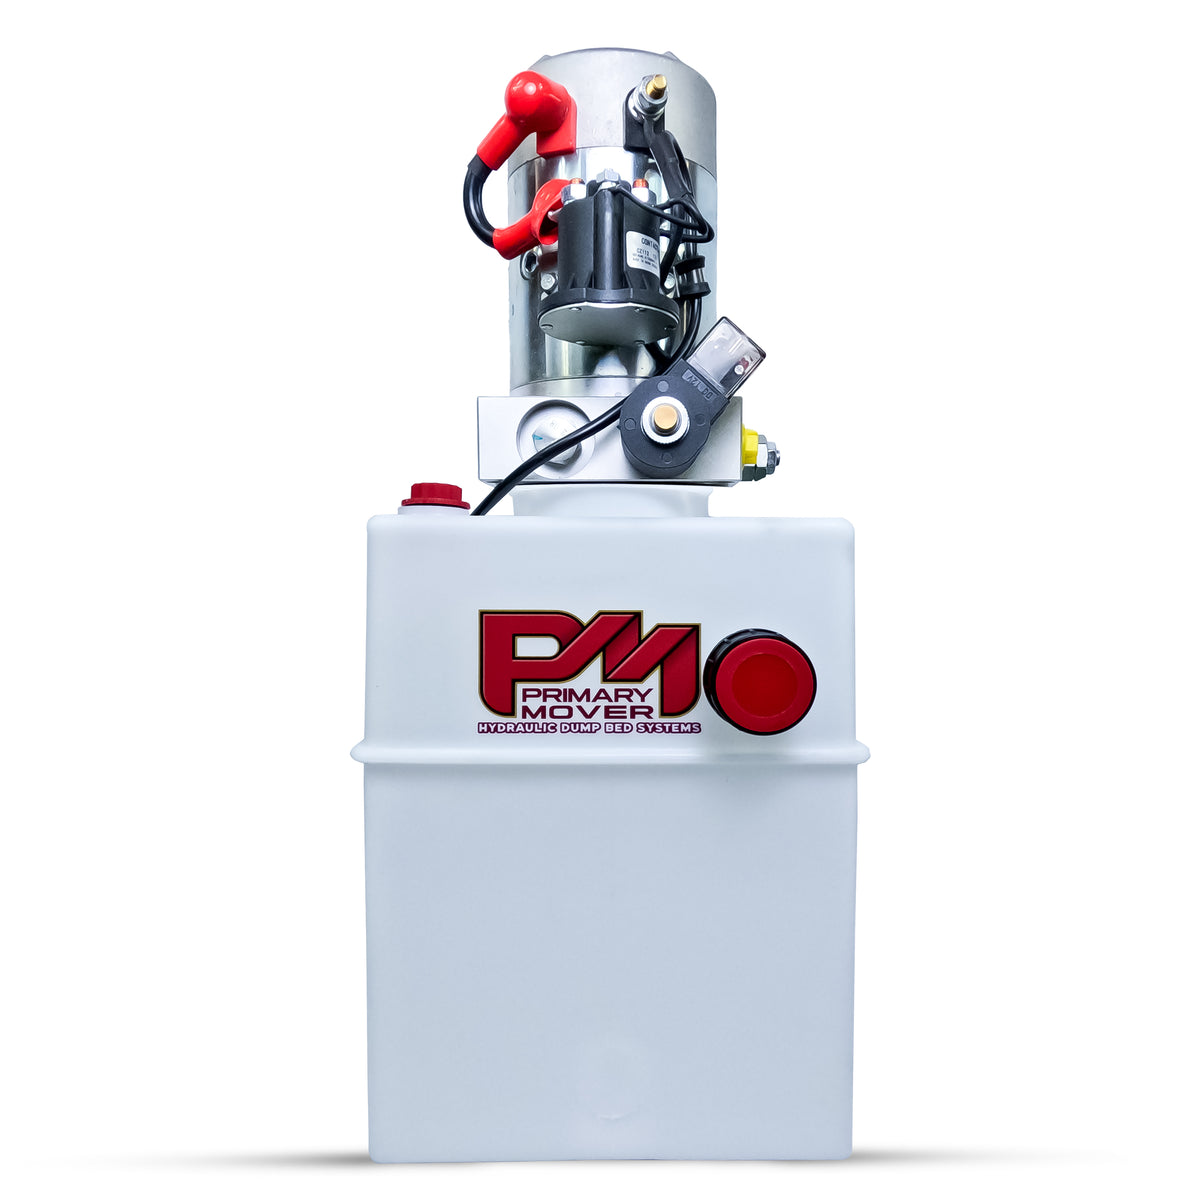 Primary Mover 12V Single-Acting Hydraulic Pump with Poly Reservoir, featuring red buttons, a cylinder, and a logo, designed for efficient hydraulic dump bed systems.